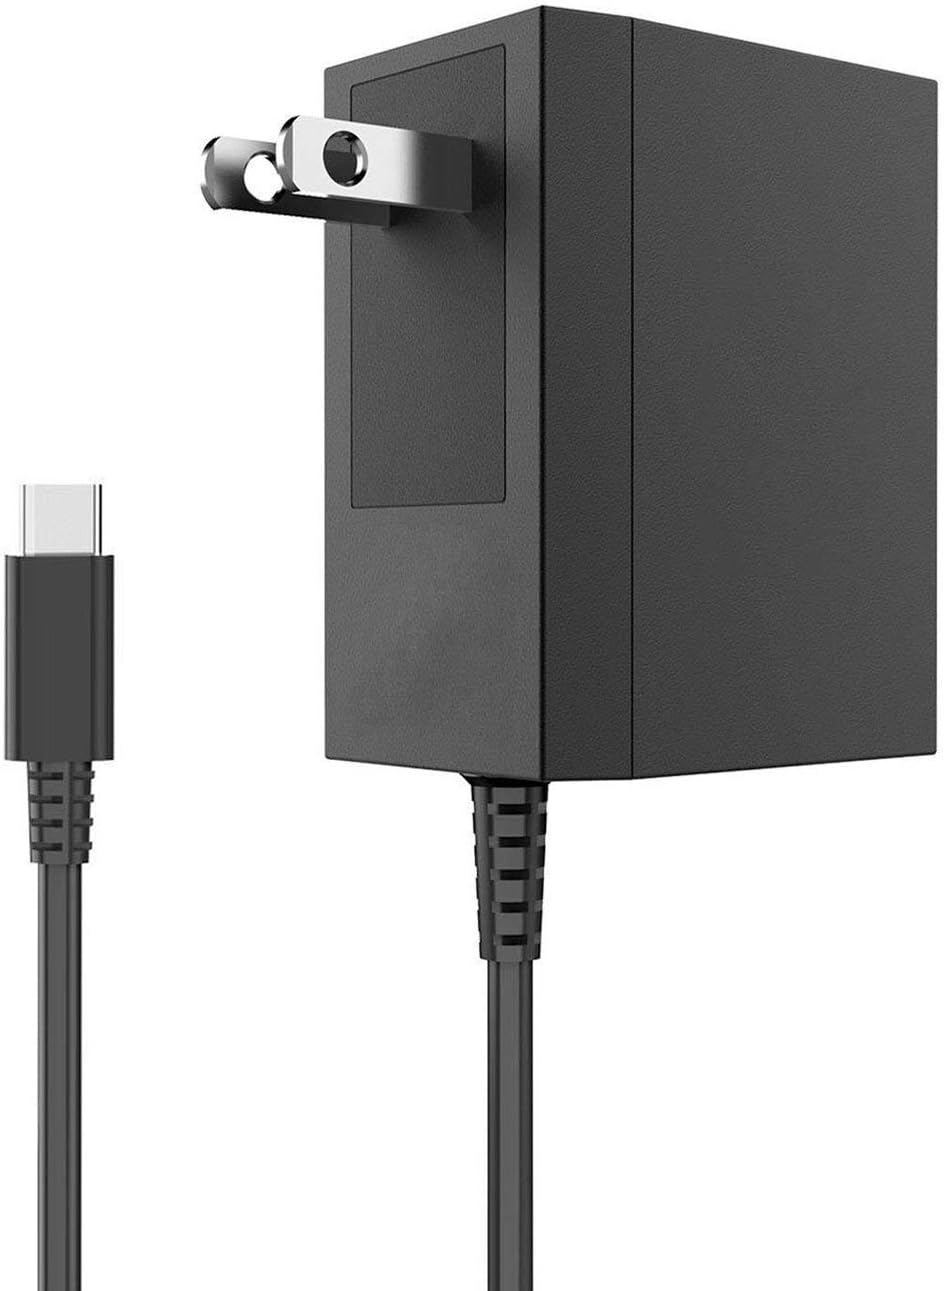 Nintendo Switch Charger: Efficient and Reliable